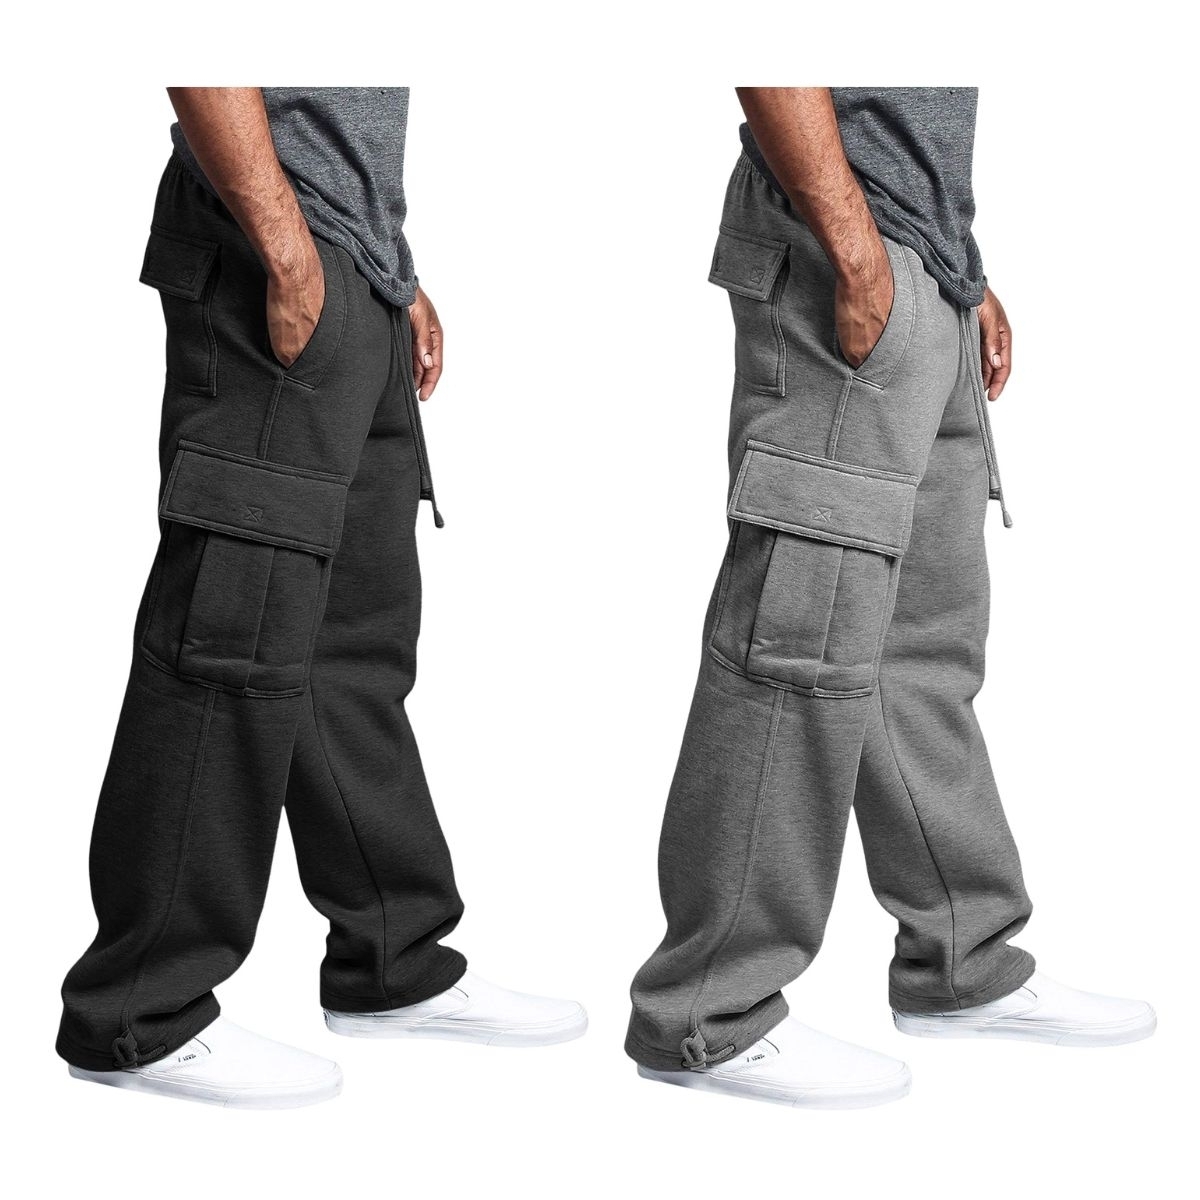 2-Pack: Men's Casual Solid Fleece Lined Cargo Jogger Soft Sweatpants With Pockets - Black&navy, Medium